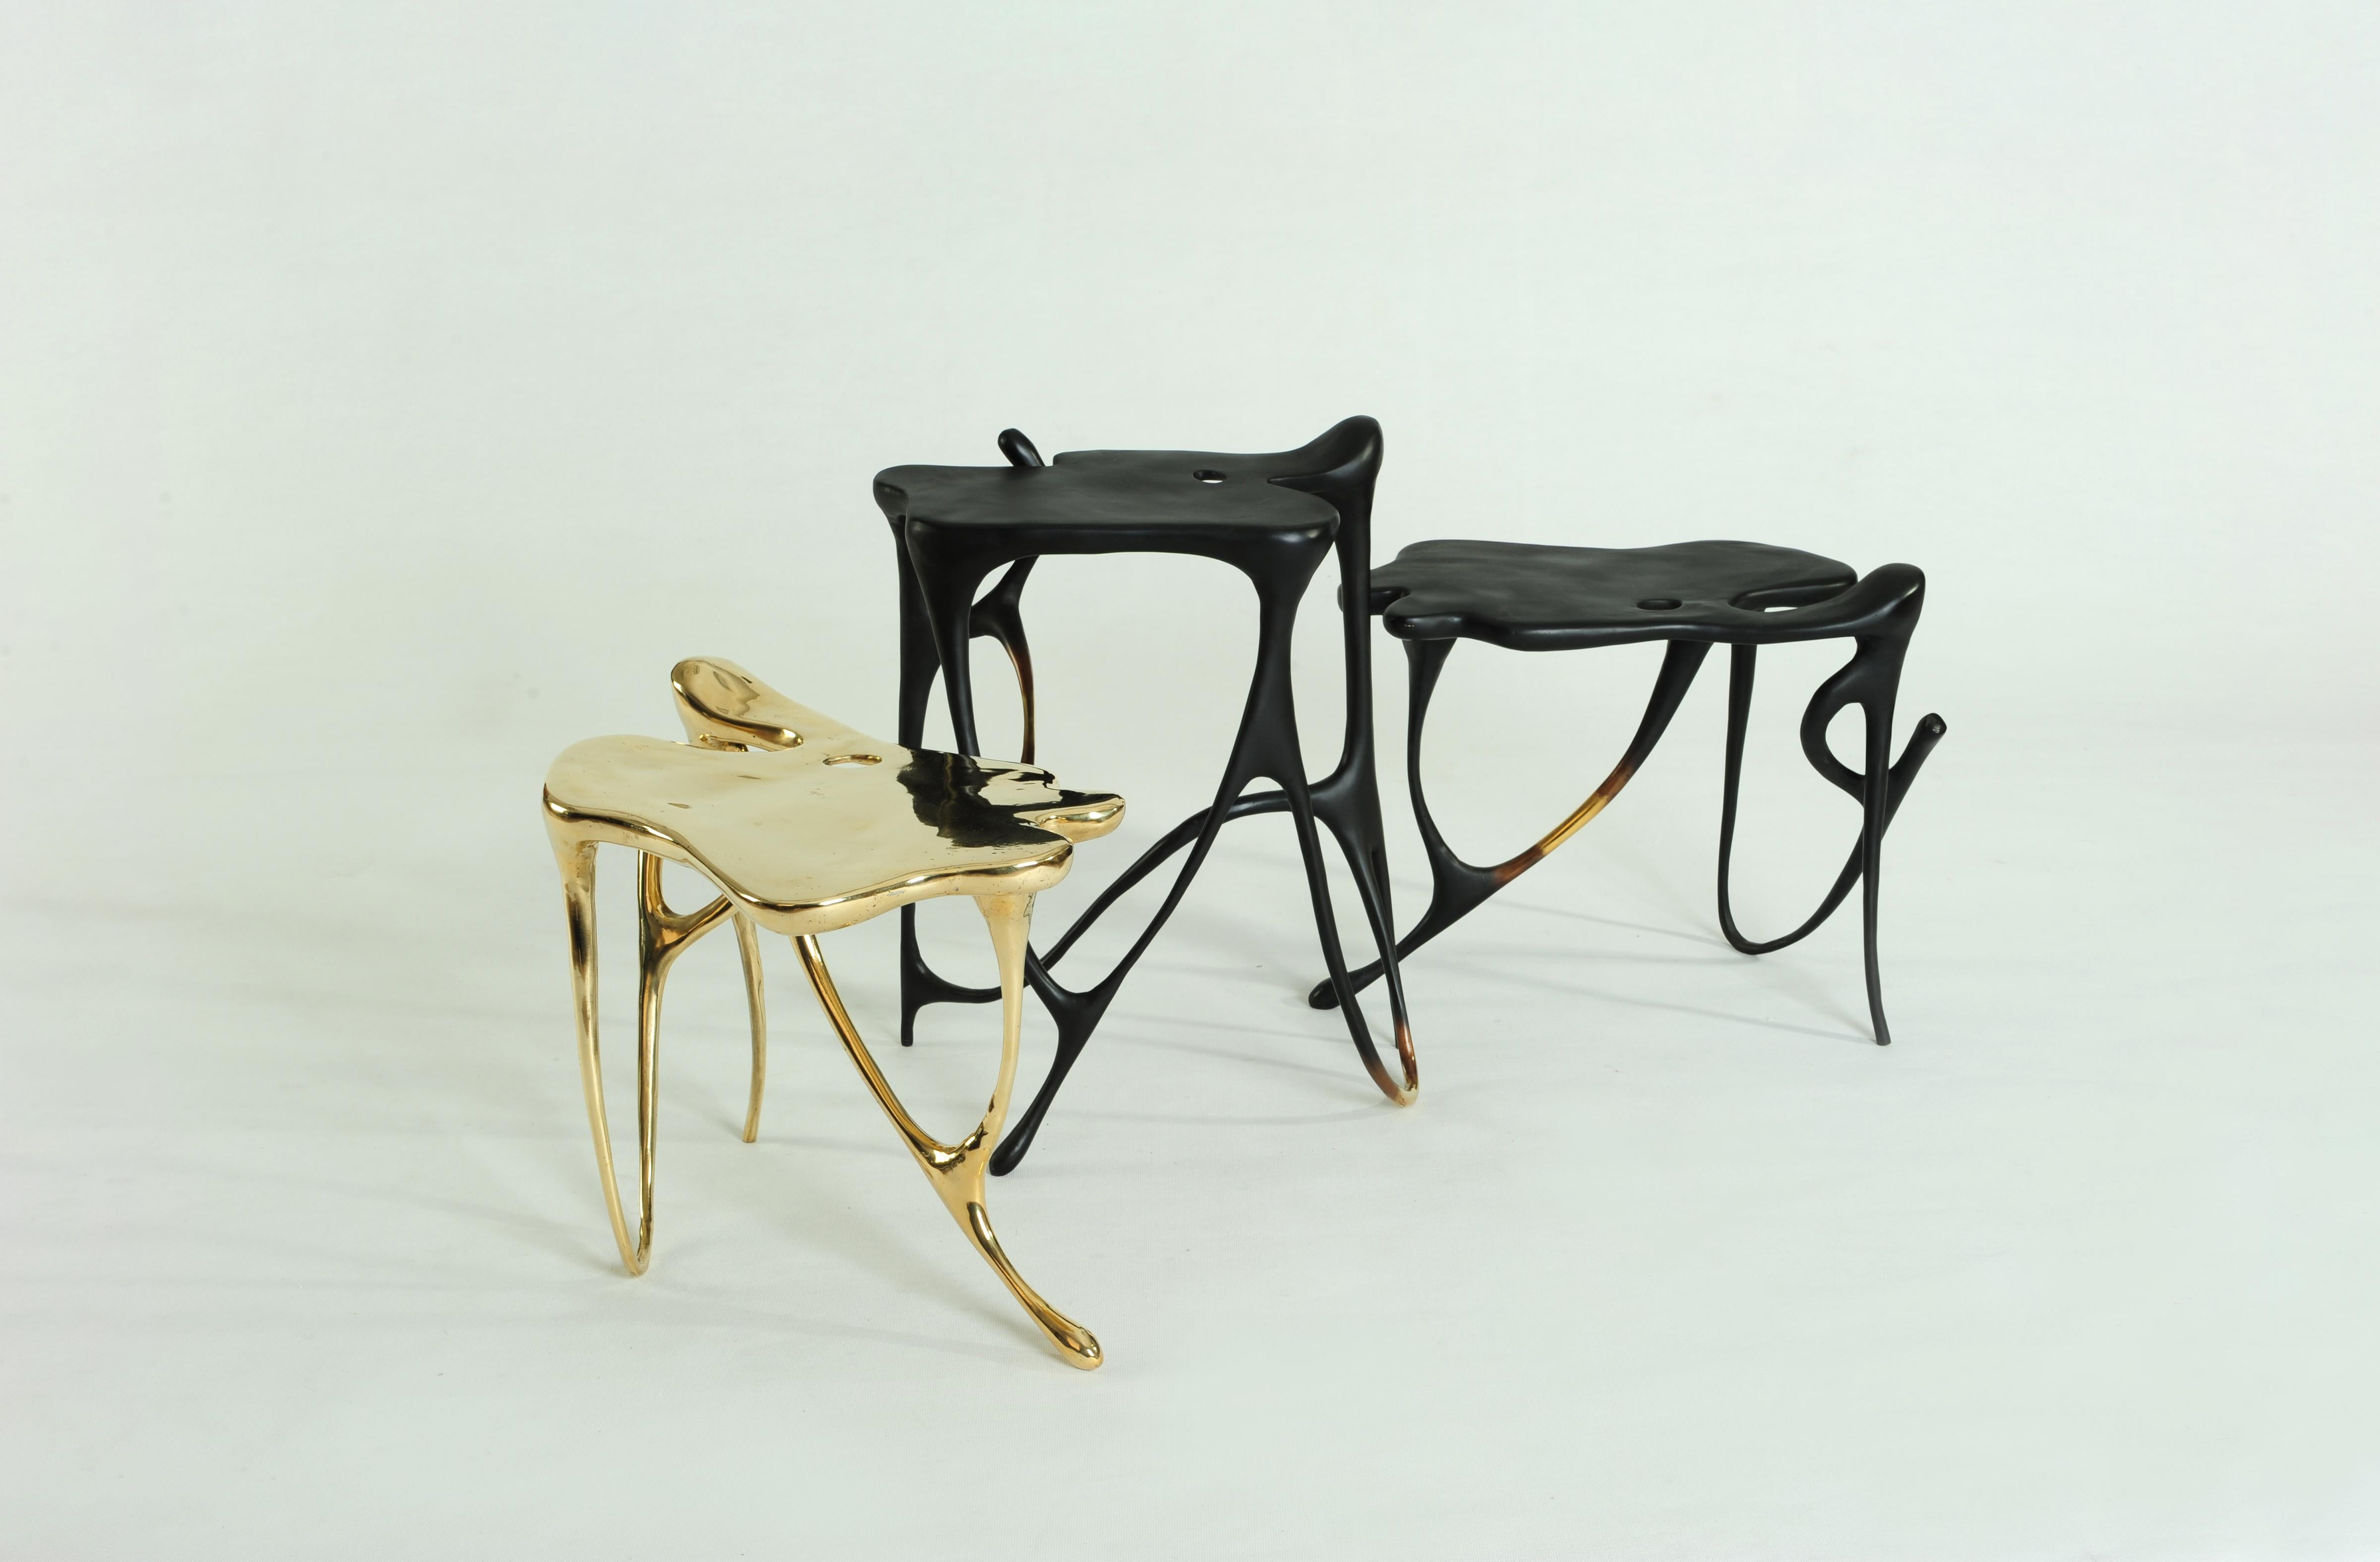 Pair of Calligraphic Sculpted Brass Side Tables by Misaya For Sale 6